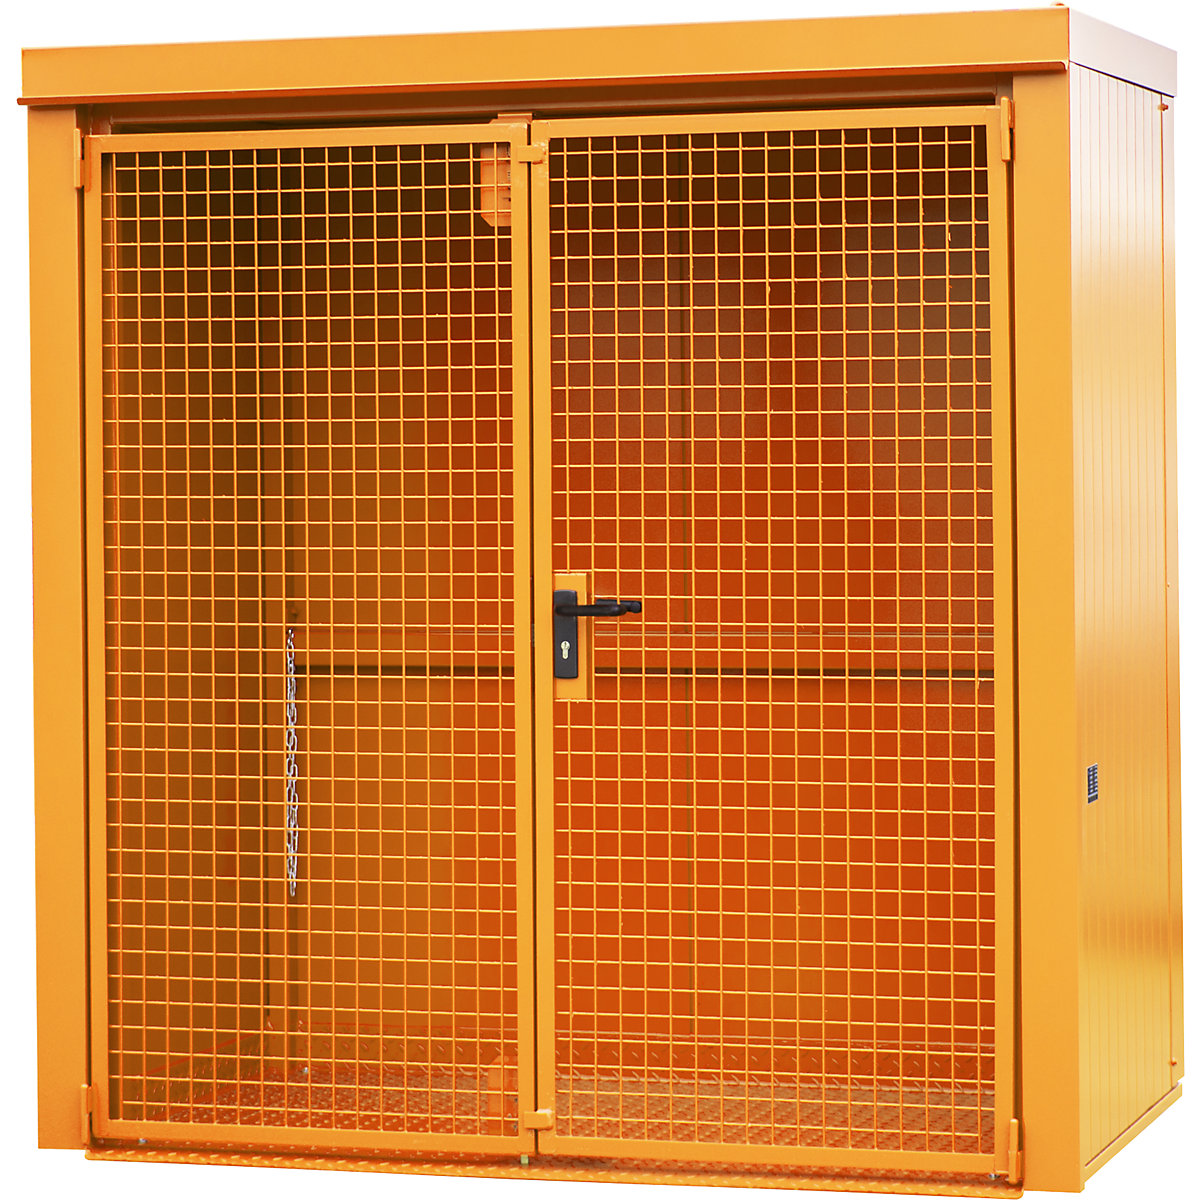 Gas cylinder container, fire resistant – eurokraft pro, for 28 cylinders with Ø 230 mm, orange-6